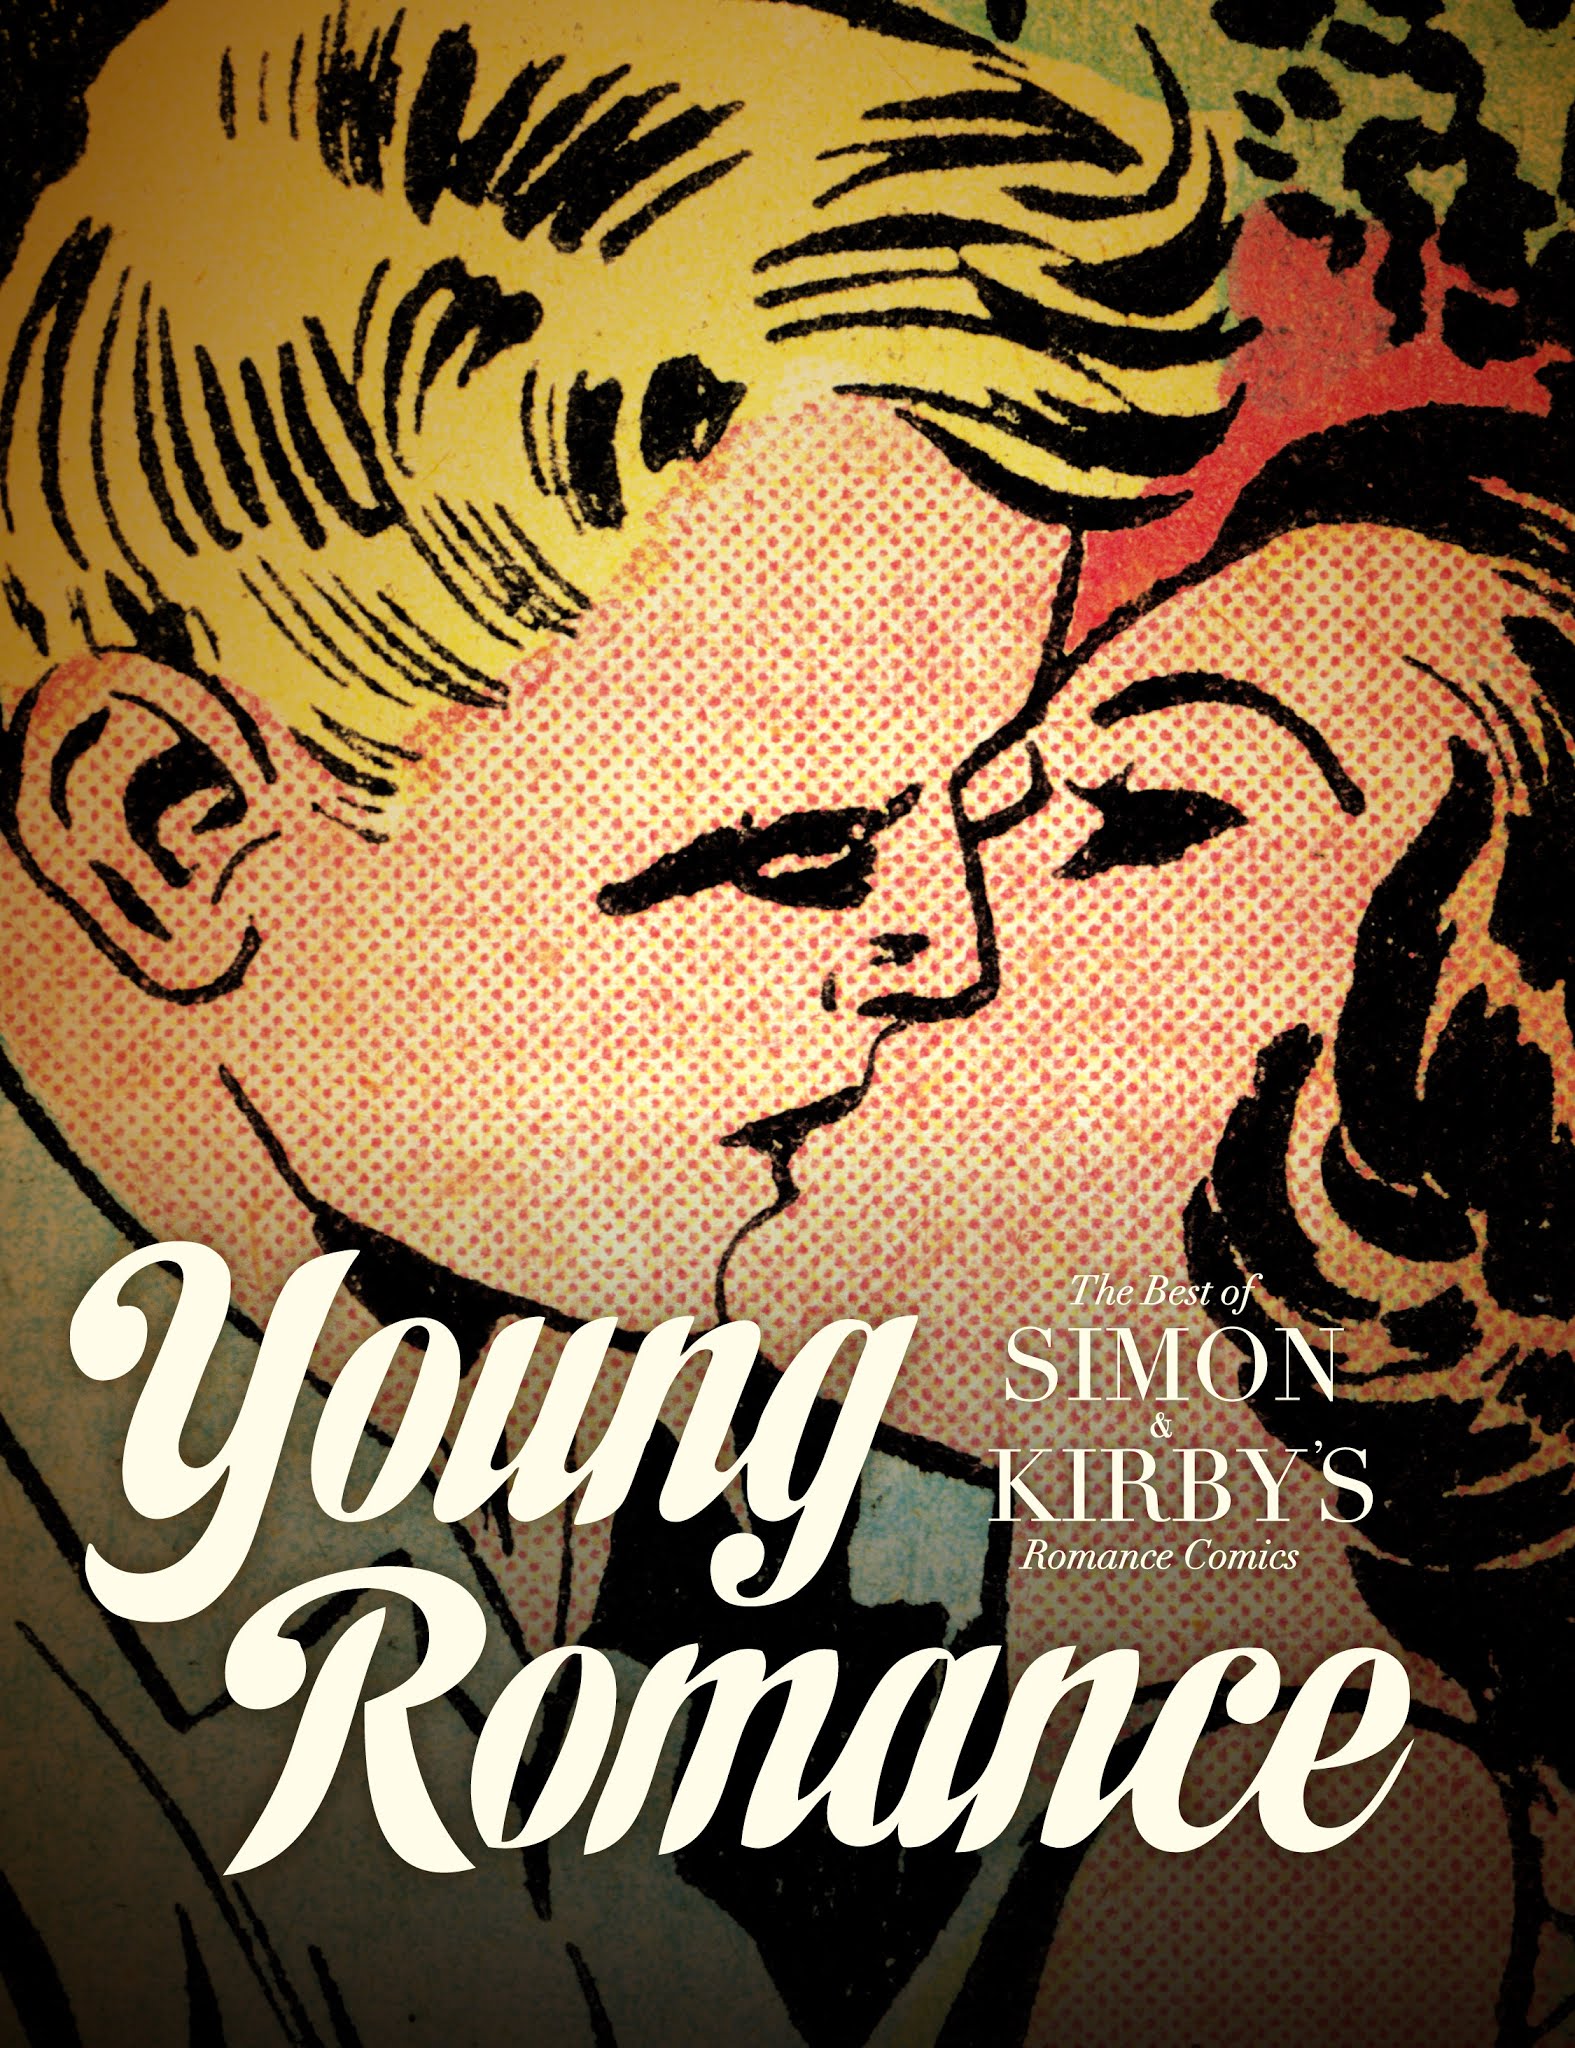 Read online Young Romance: The Best of Simon & Kirby’s Romance Comics comic -  Issue # TPB 2 - 1